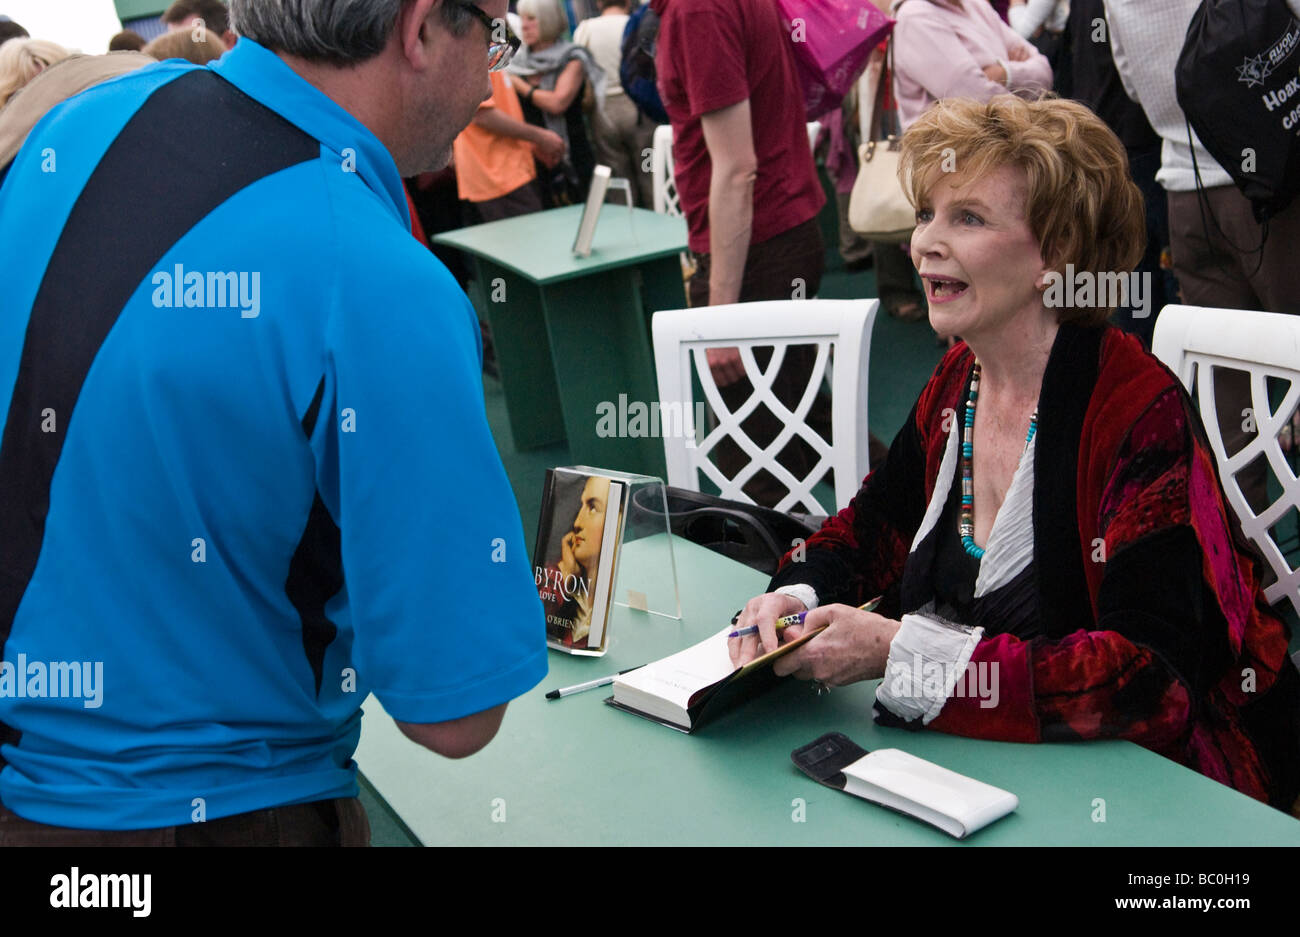 Edna O Brien Irish novelist pictured book signing at Hay Festival 2009 Stock Photo